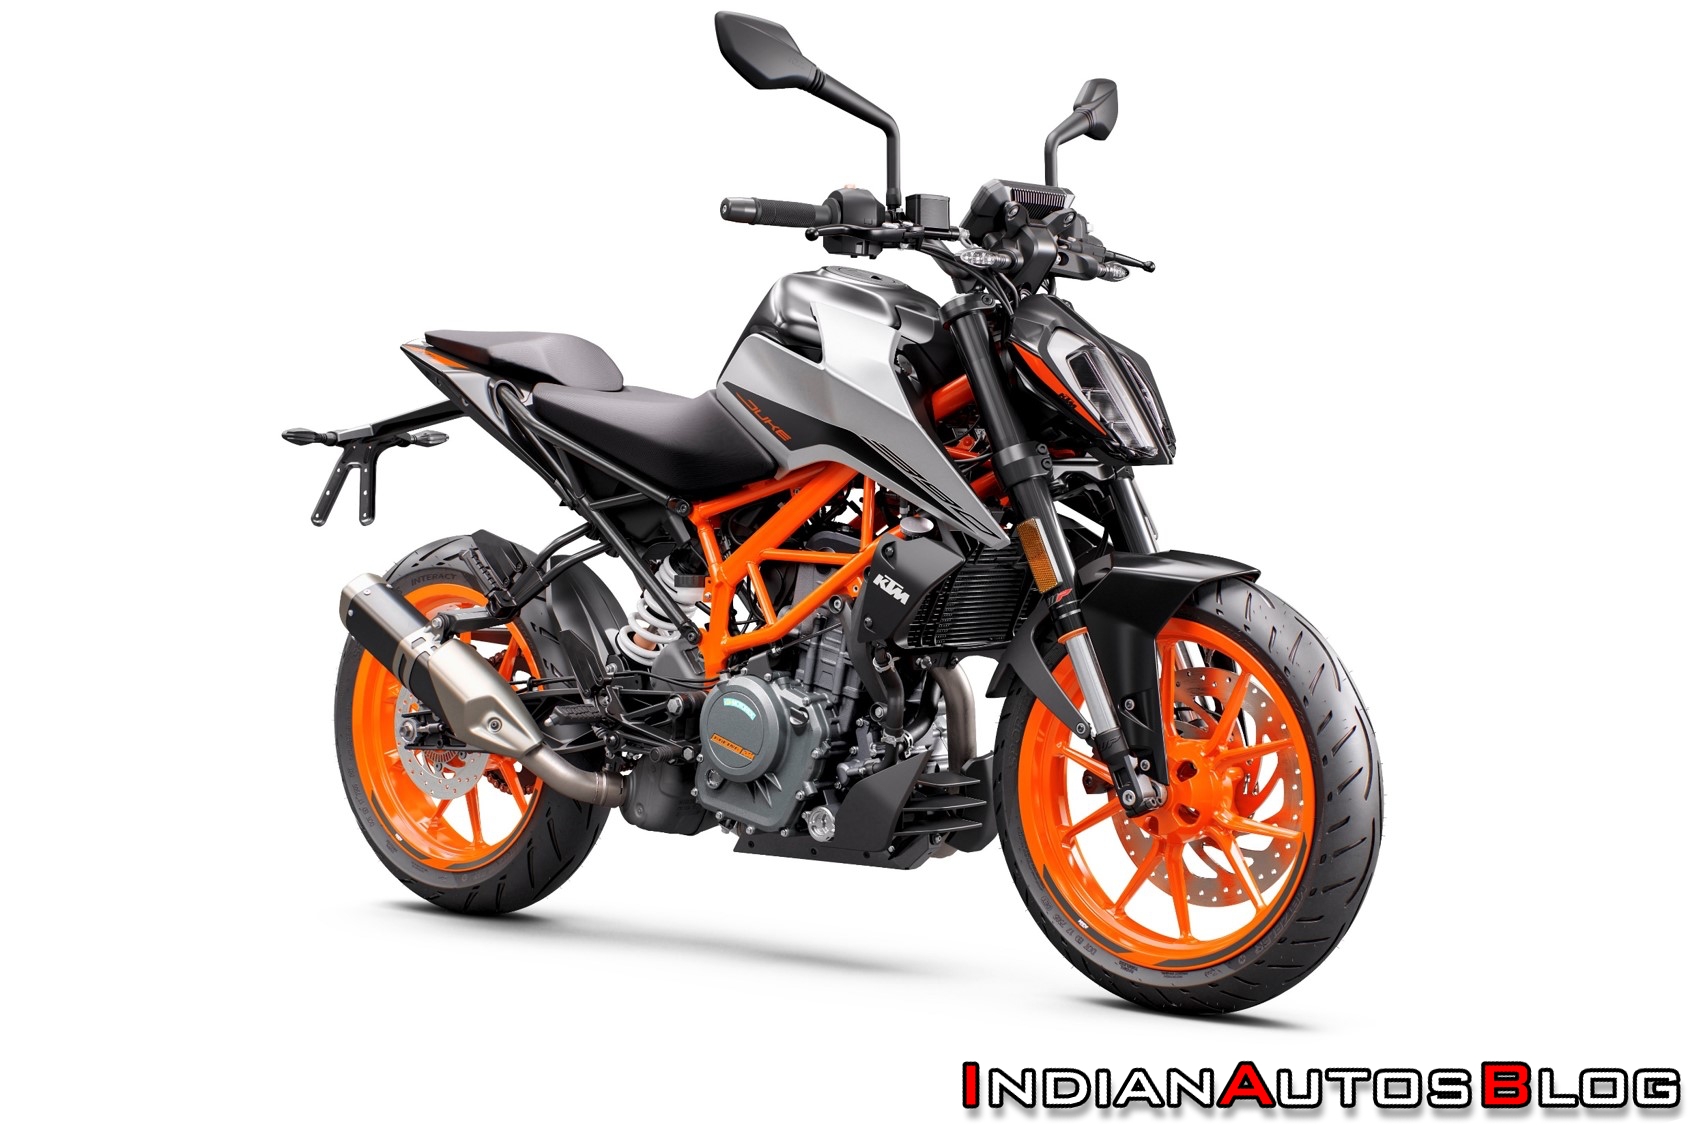 Ktm Bikes In India Get A Price Hike Of Over Inr 4 000 Report